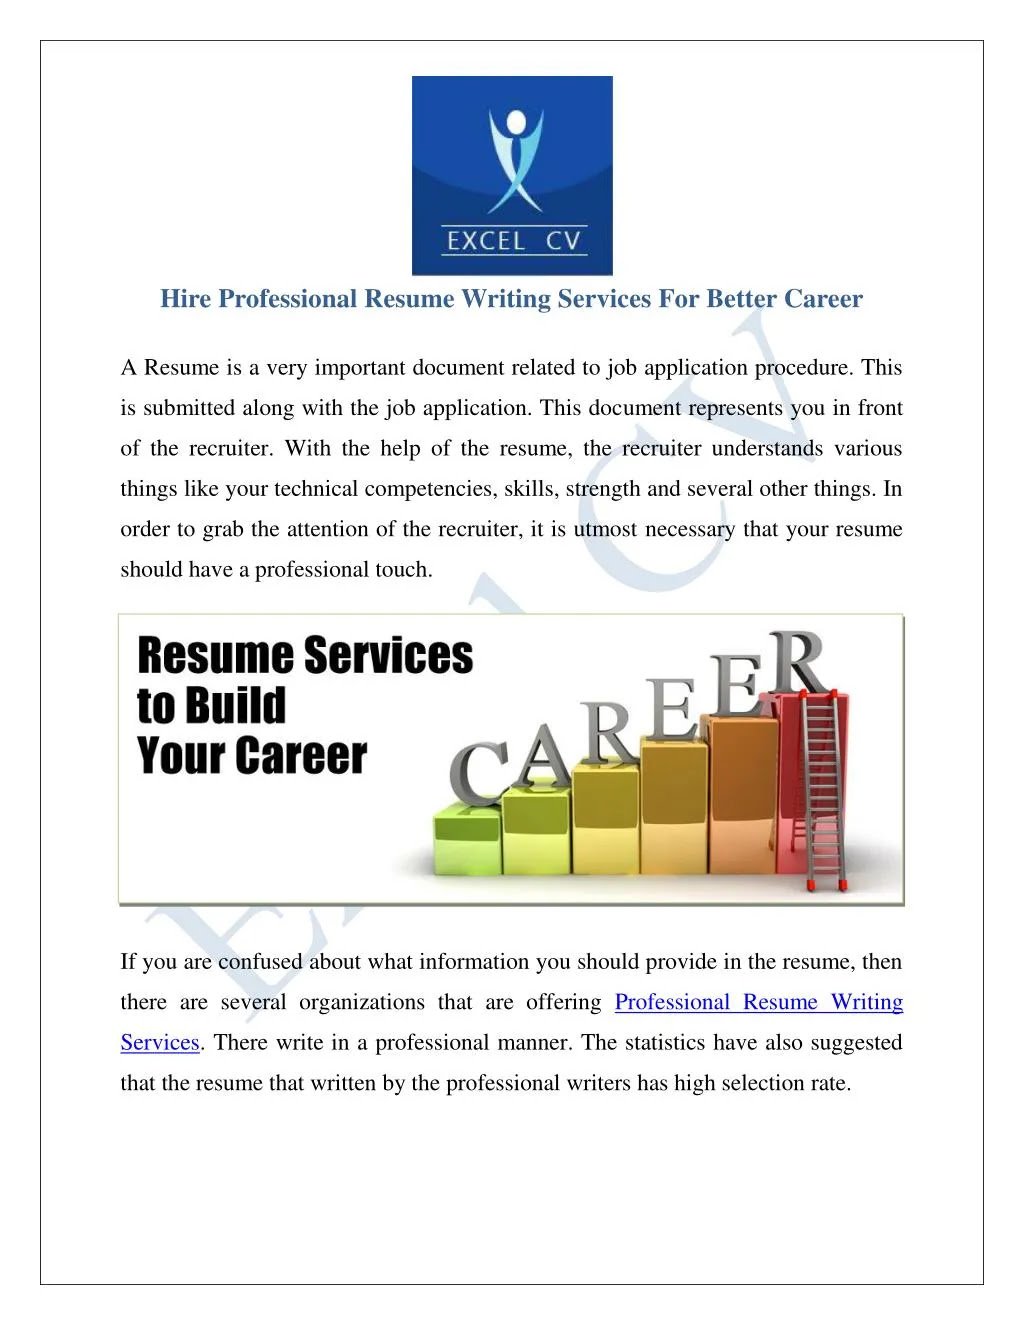 Professional resume writing services melbourne